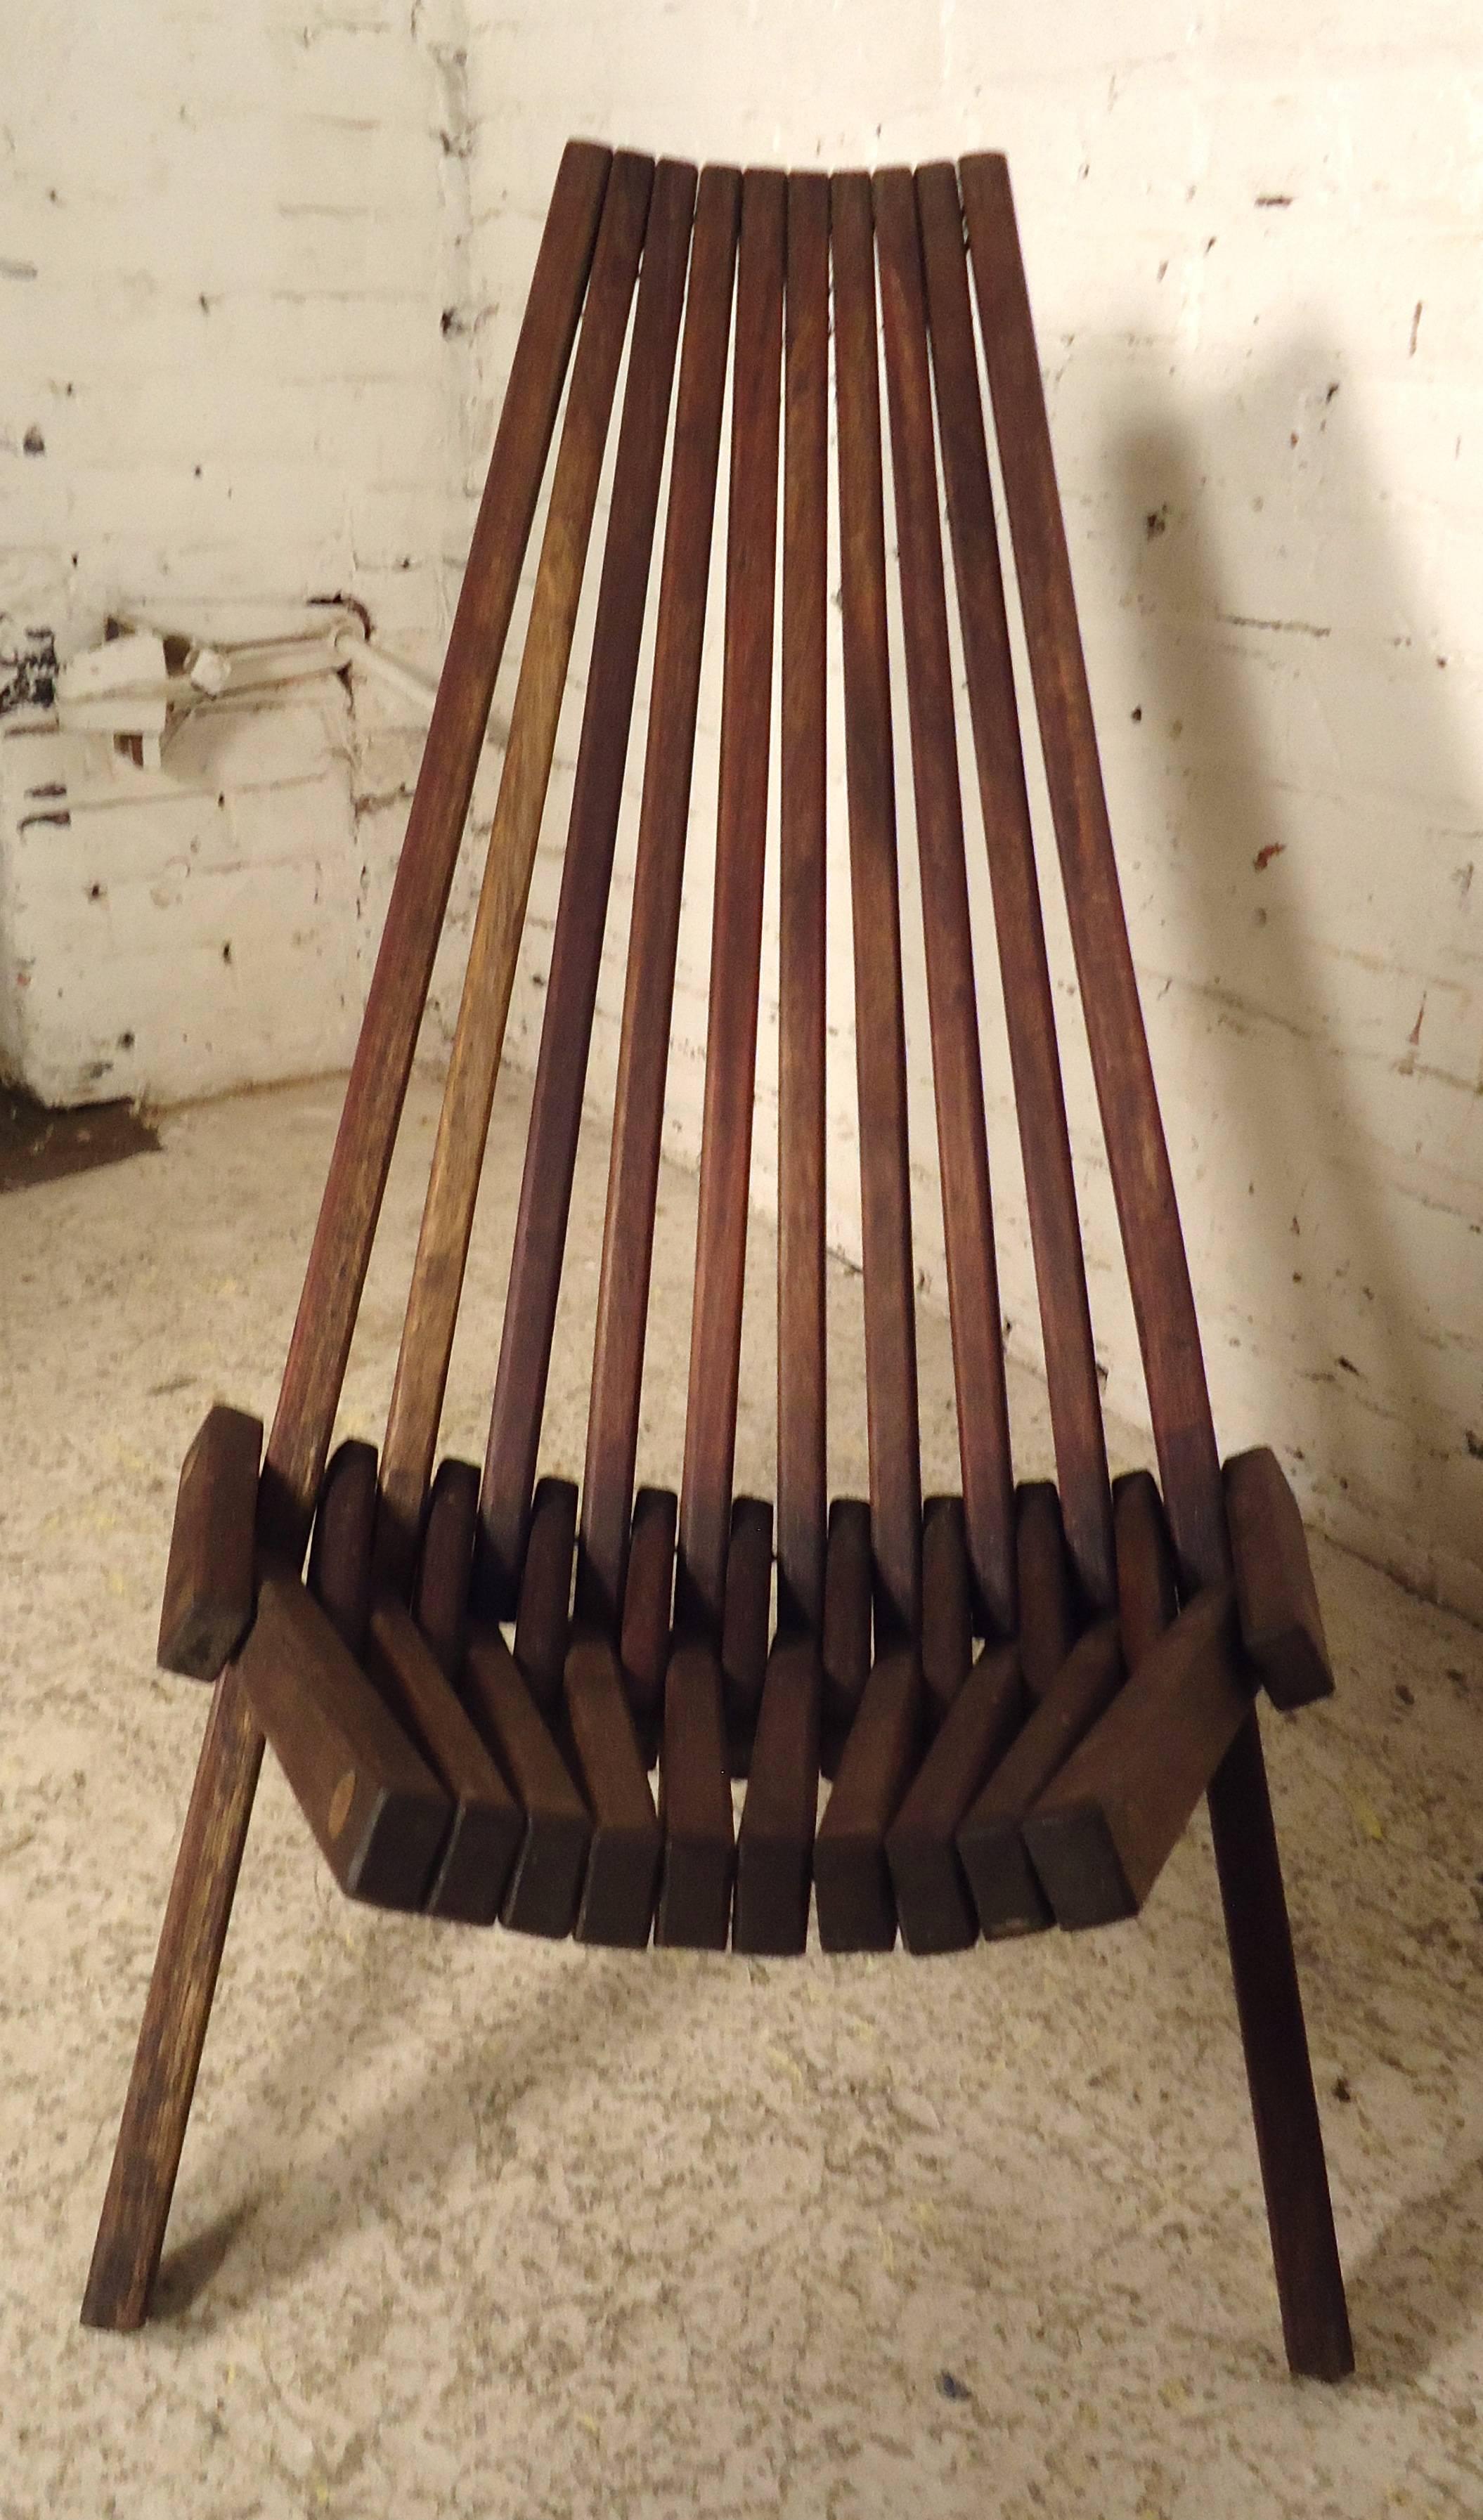 Pair of vintage folding chairs with teak slats. Unique angled form that folds up for easy moving.

(Please confirm item location - NY or NJ - with dealer).
       